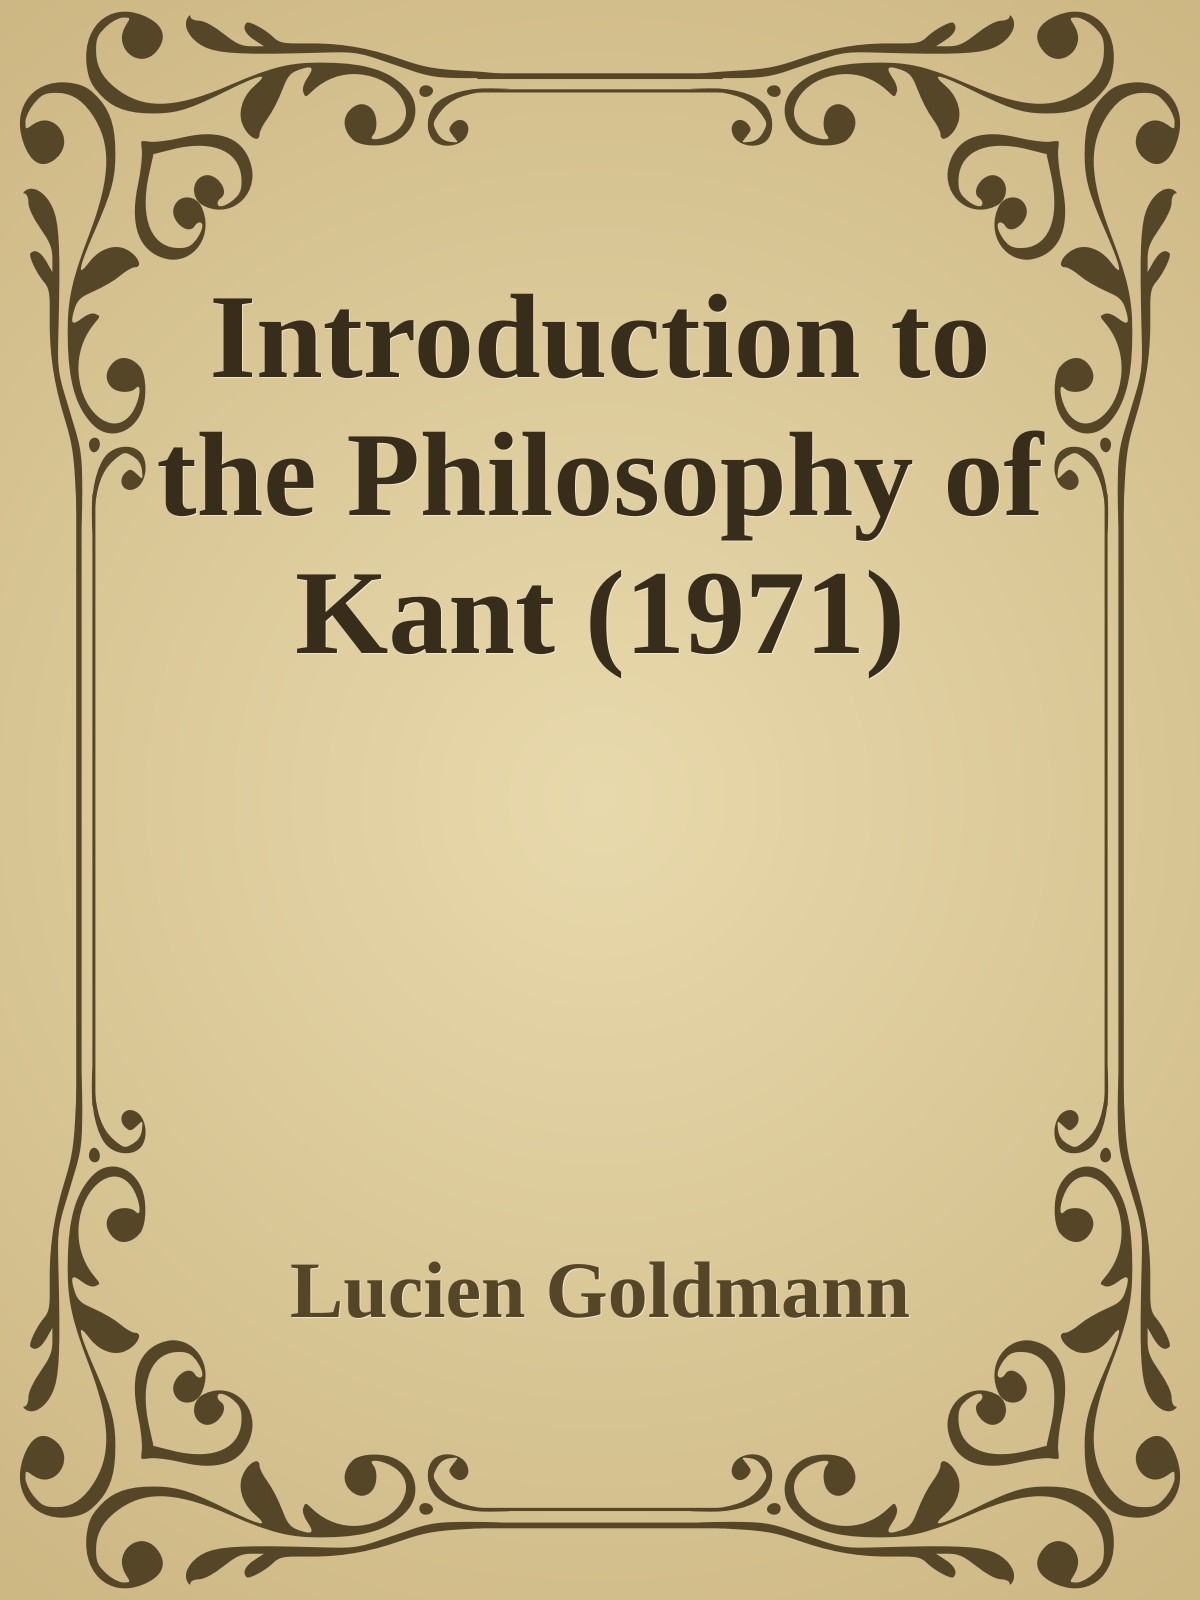 Introduction to the Philosophy of Kant (1971)